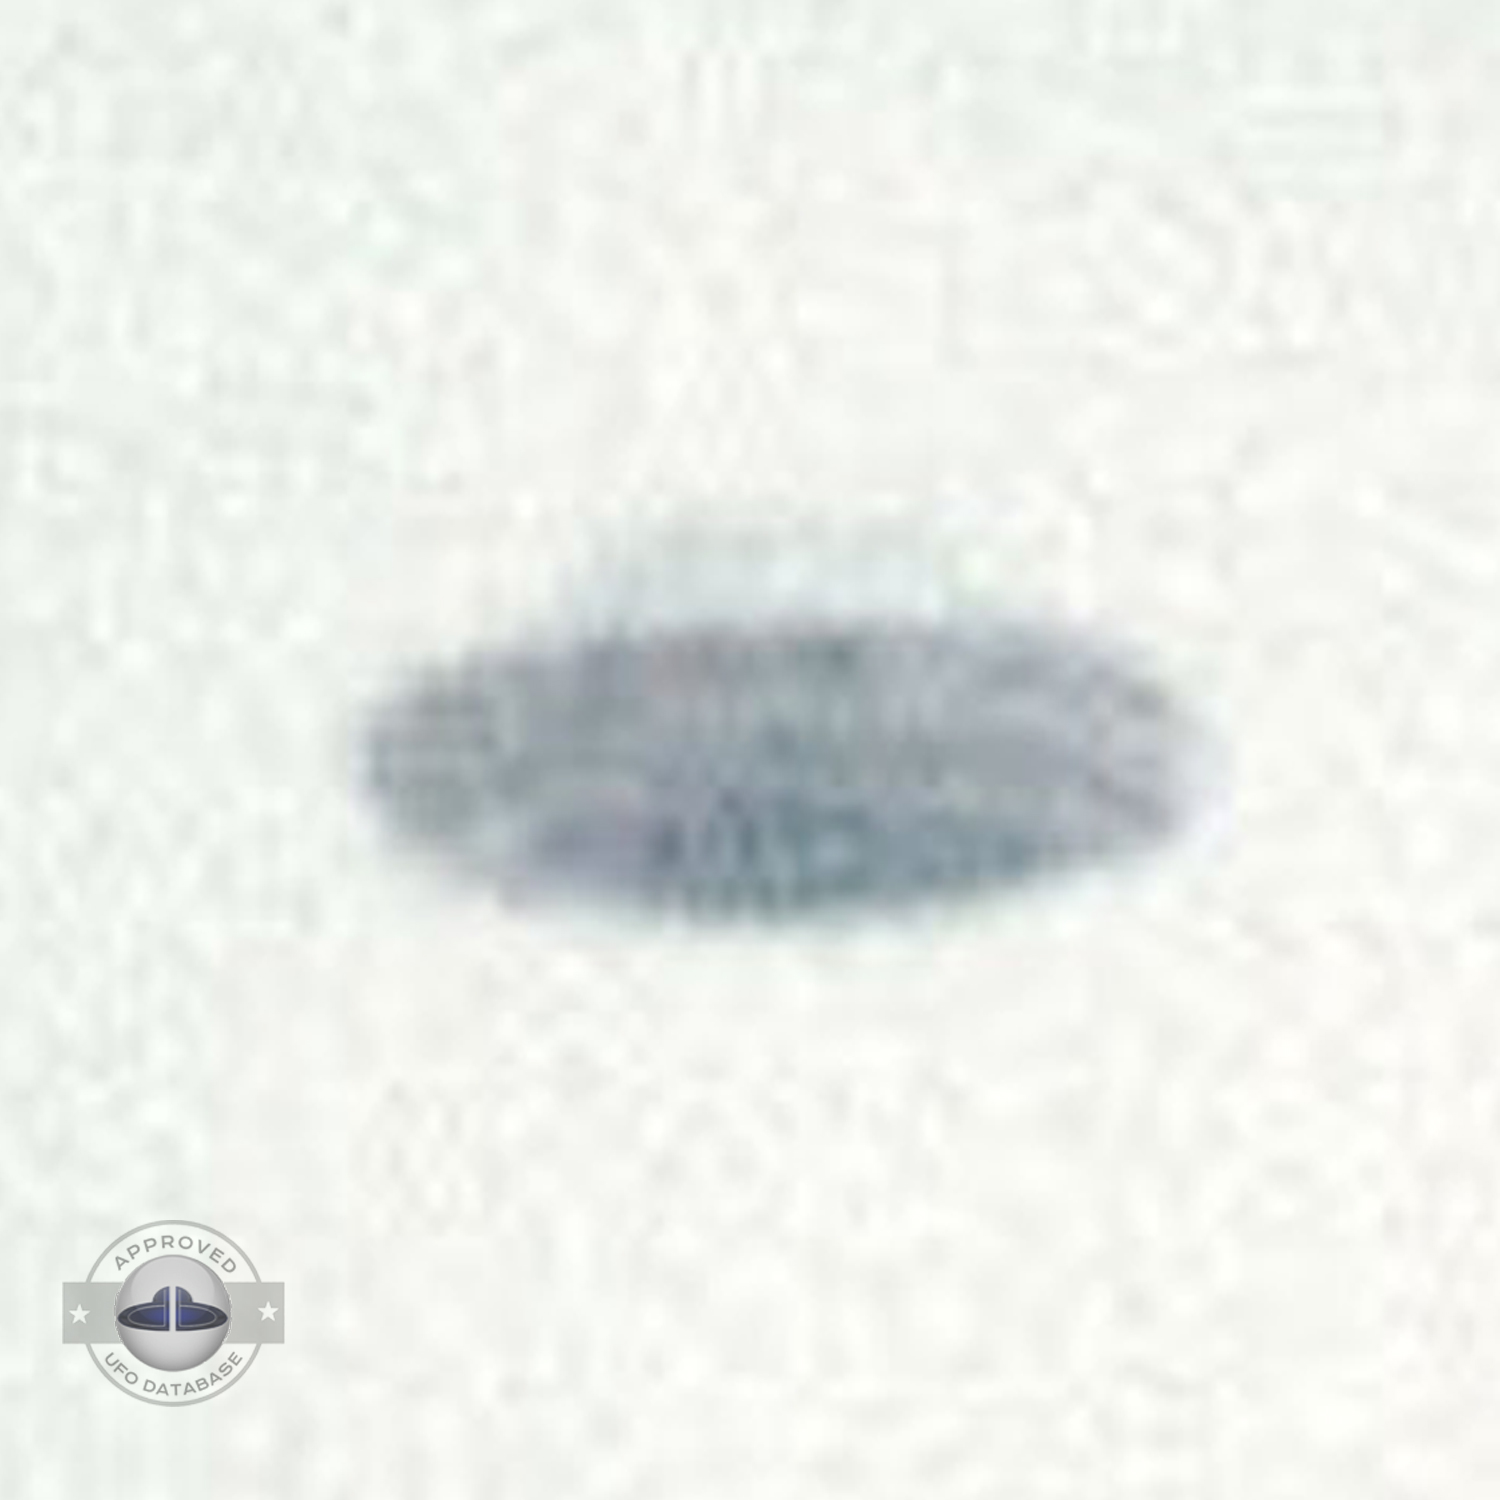 UFO picture showing UFO over snowy mountains during the day UFO Picture #36-4